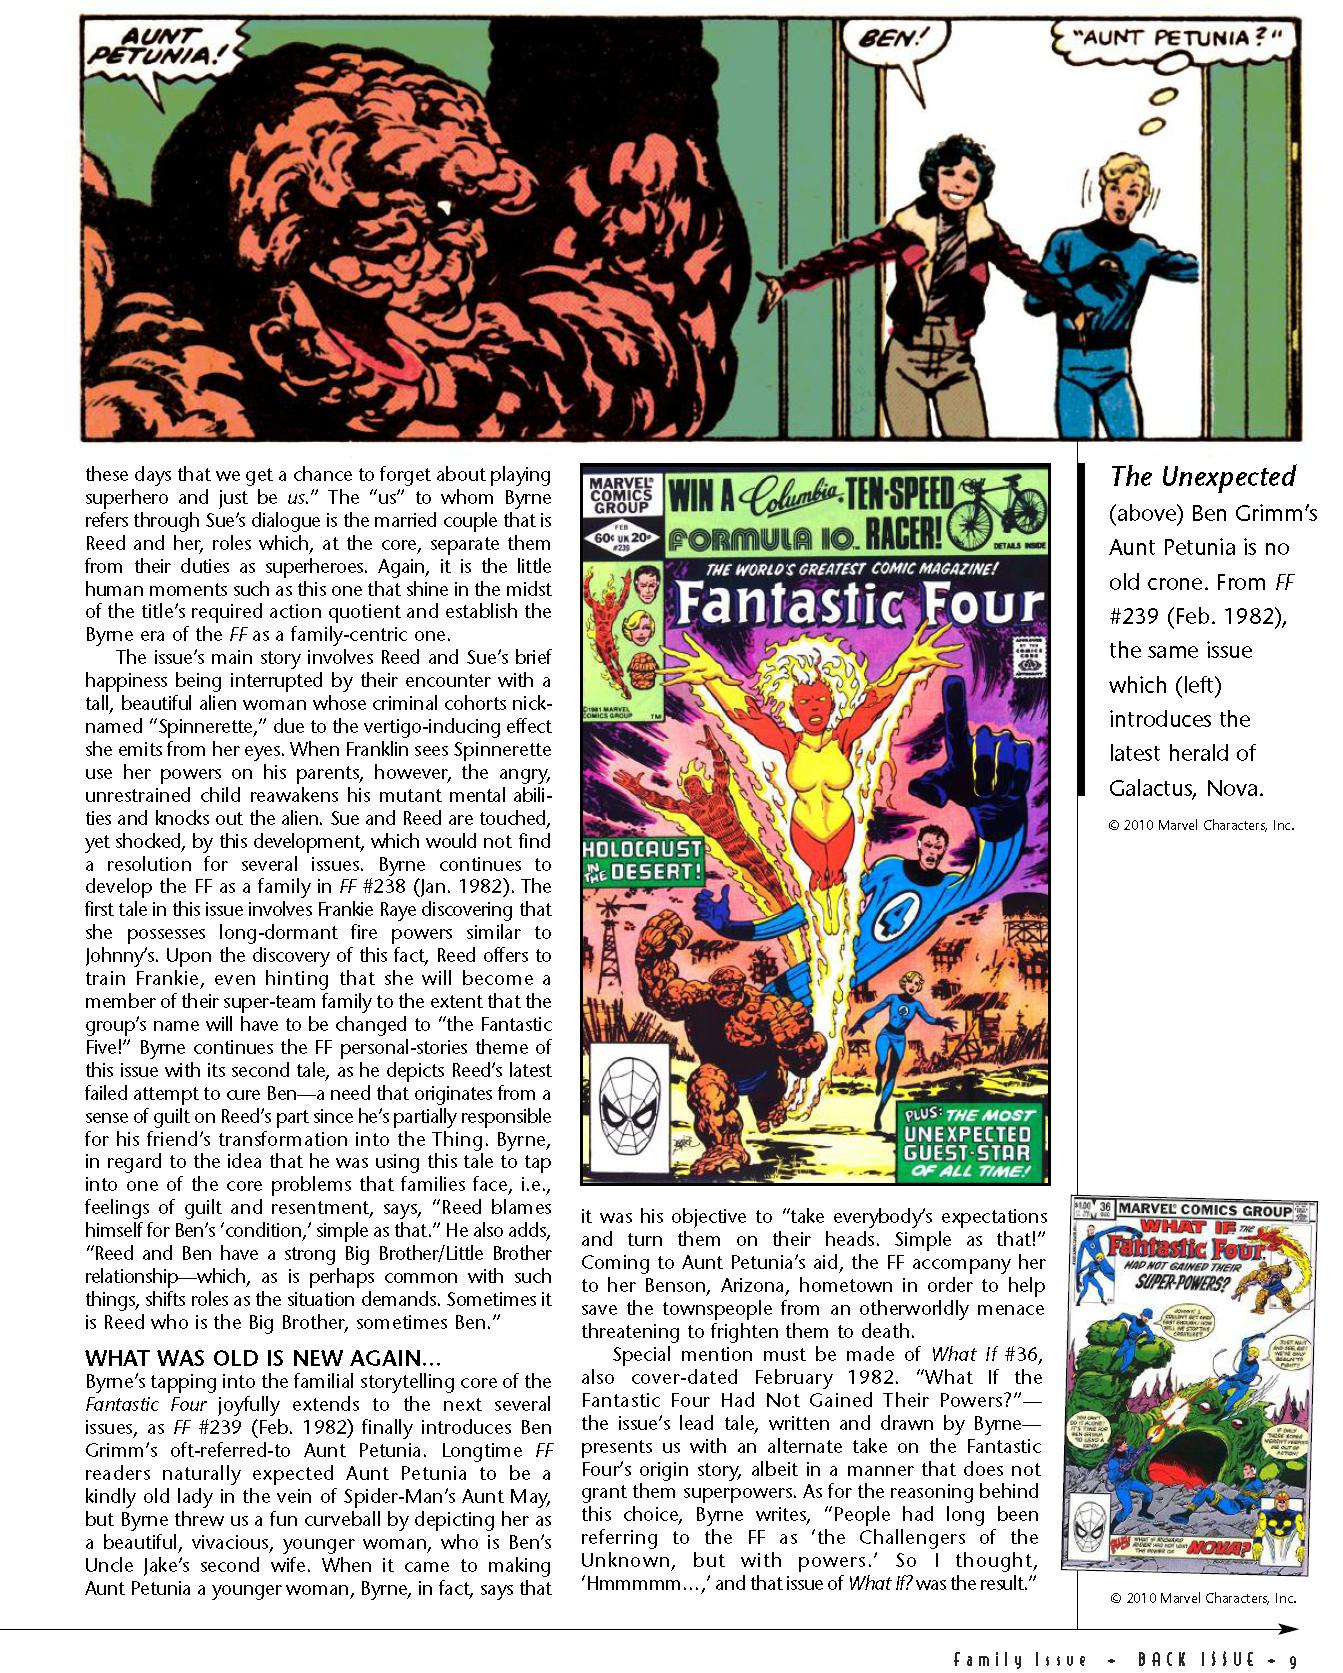 Read online Back Issue comic -  Issue #38 - 11